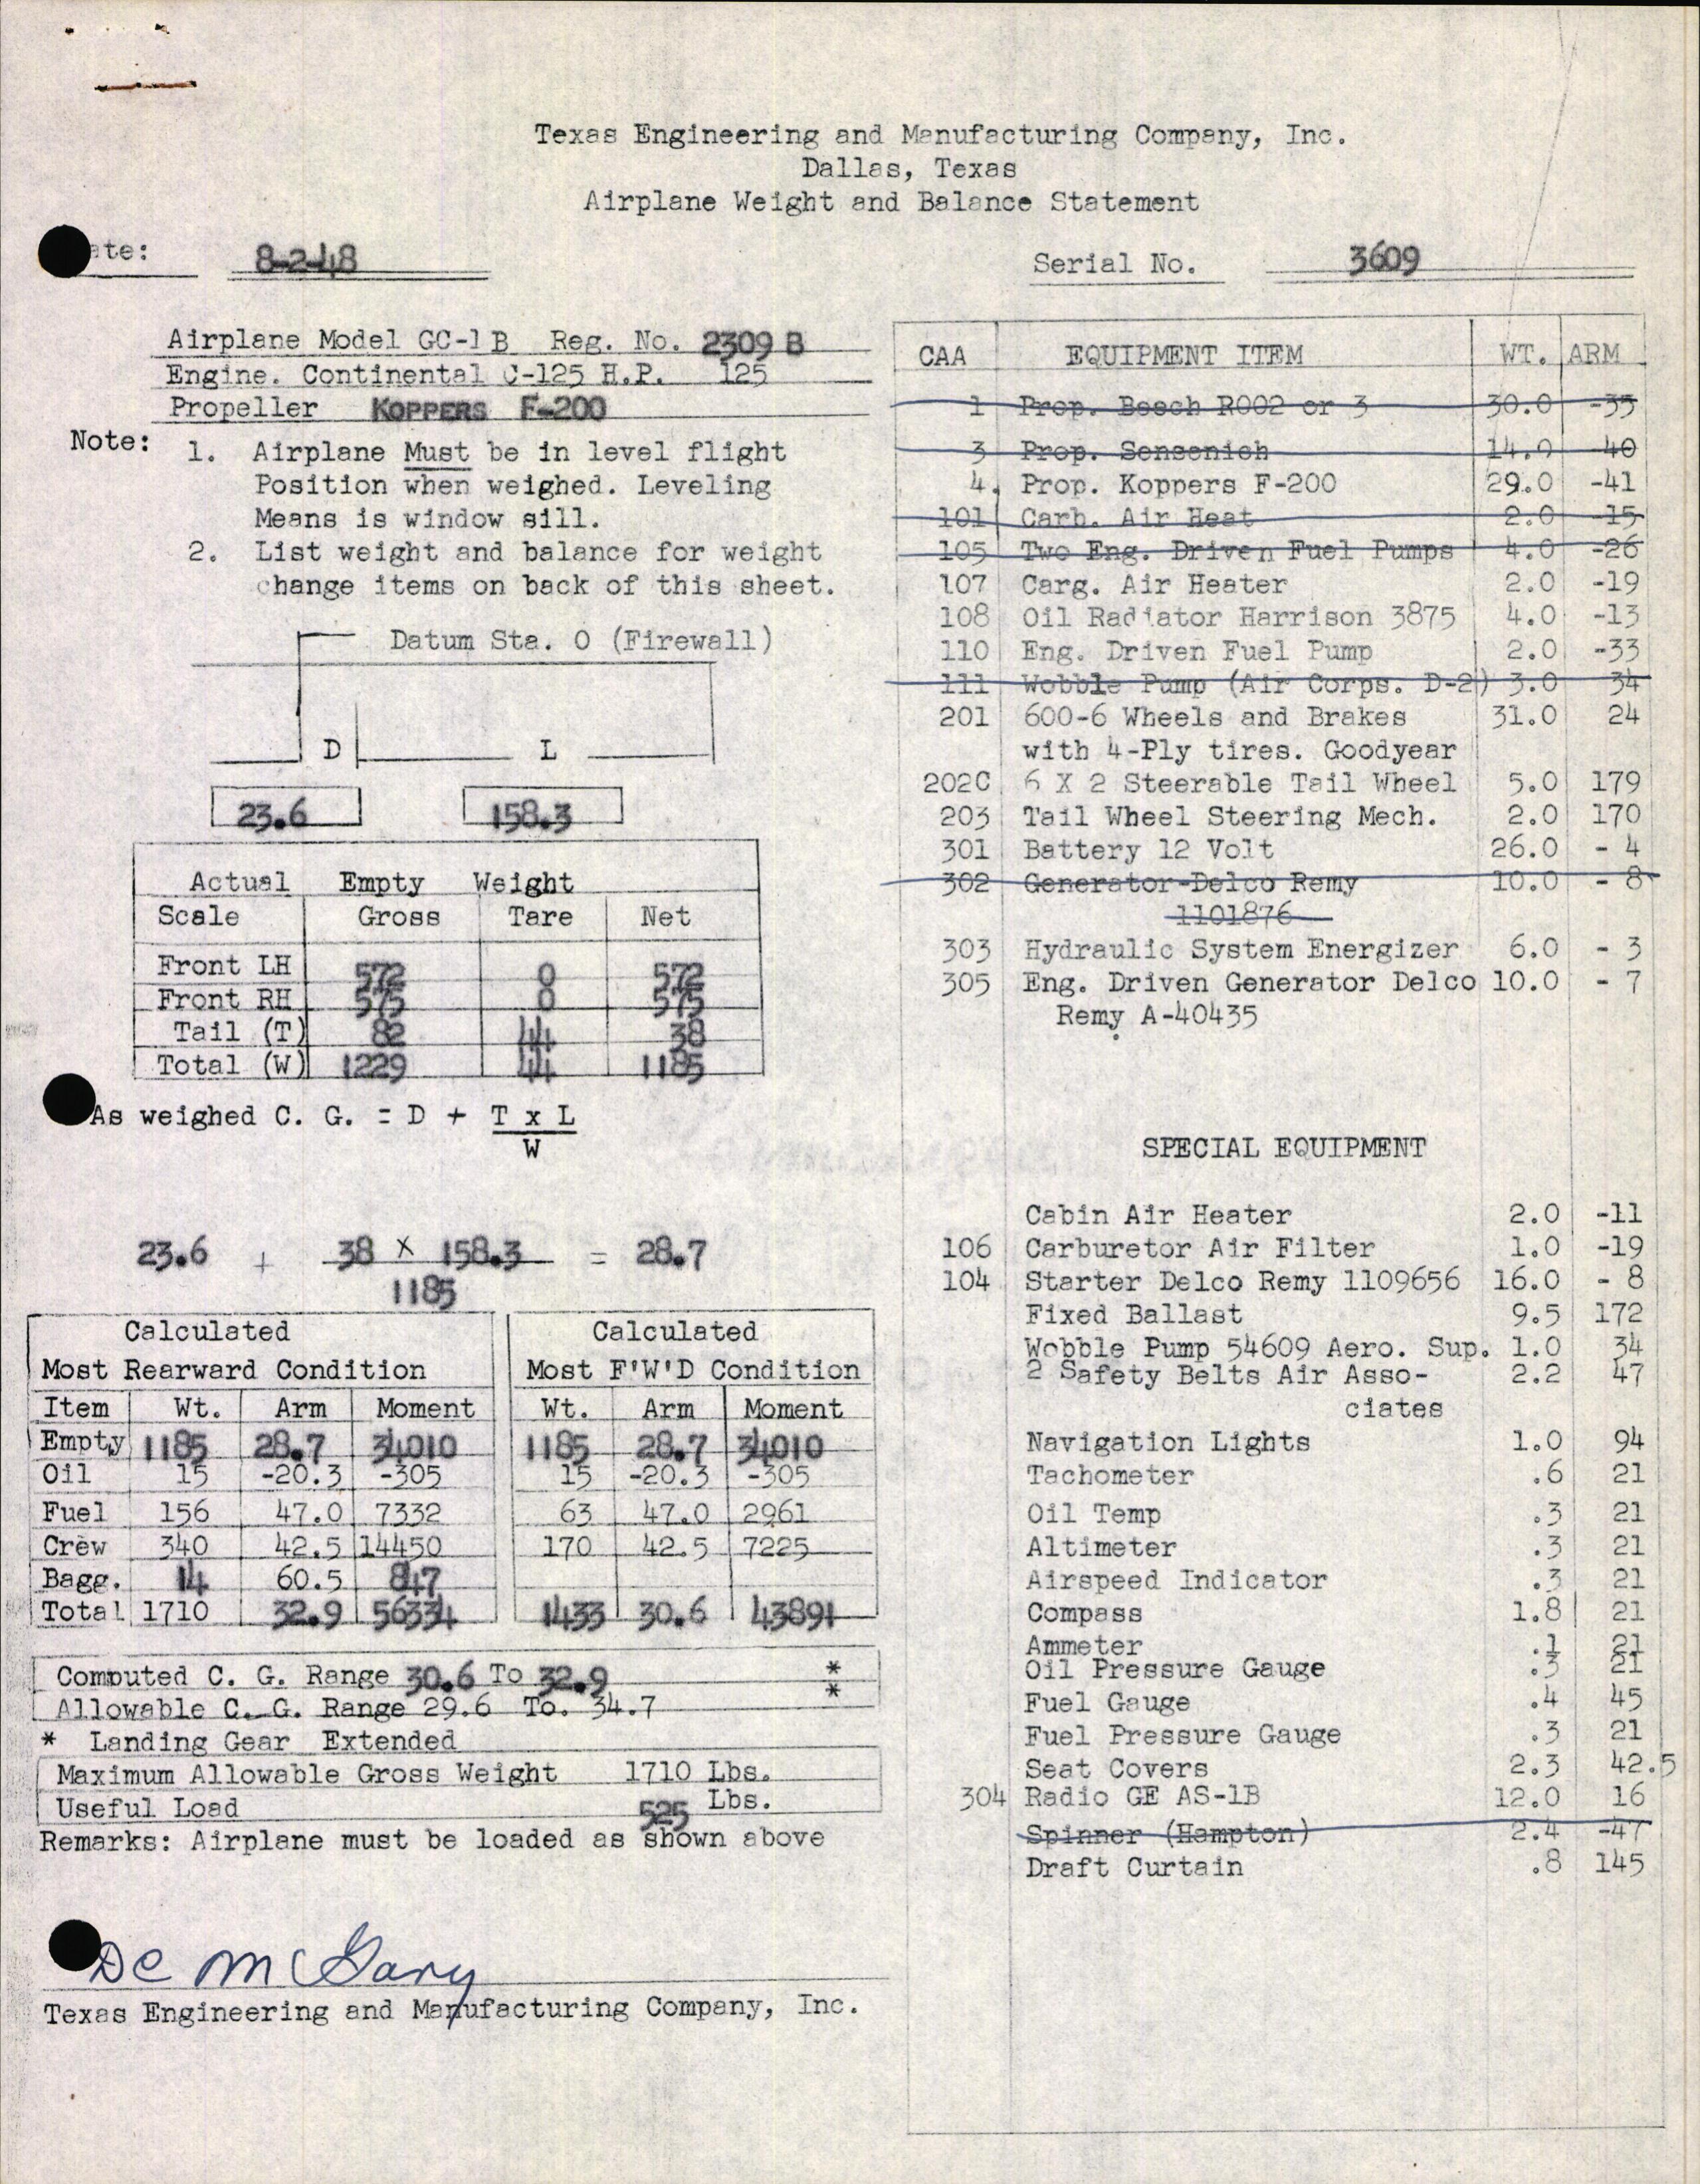 Sample page 3 from AirCorps Library document: Technical Information for Serial Number 3609